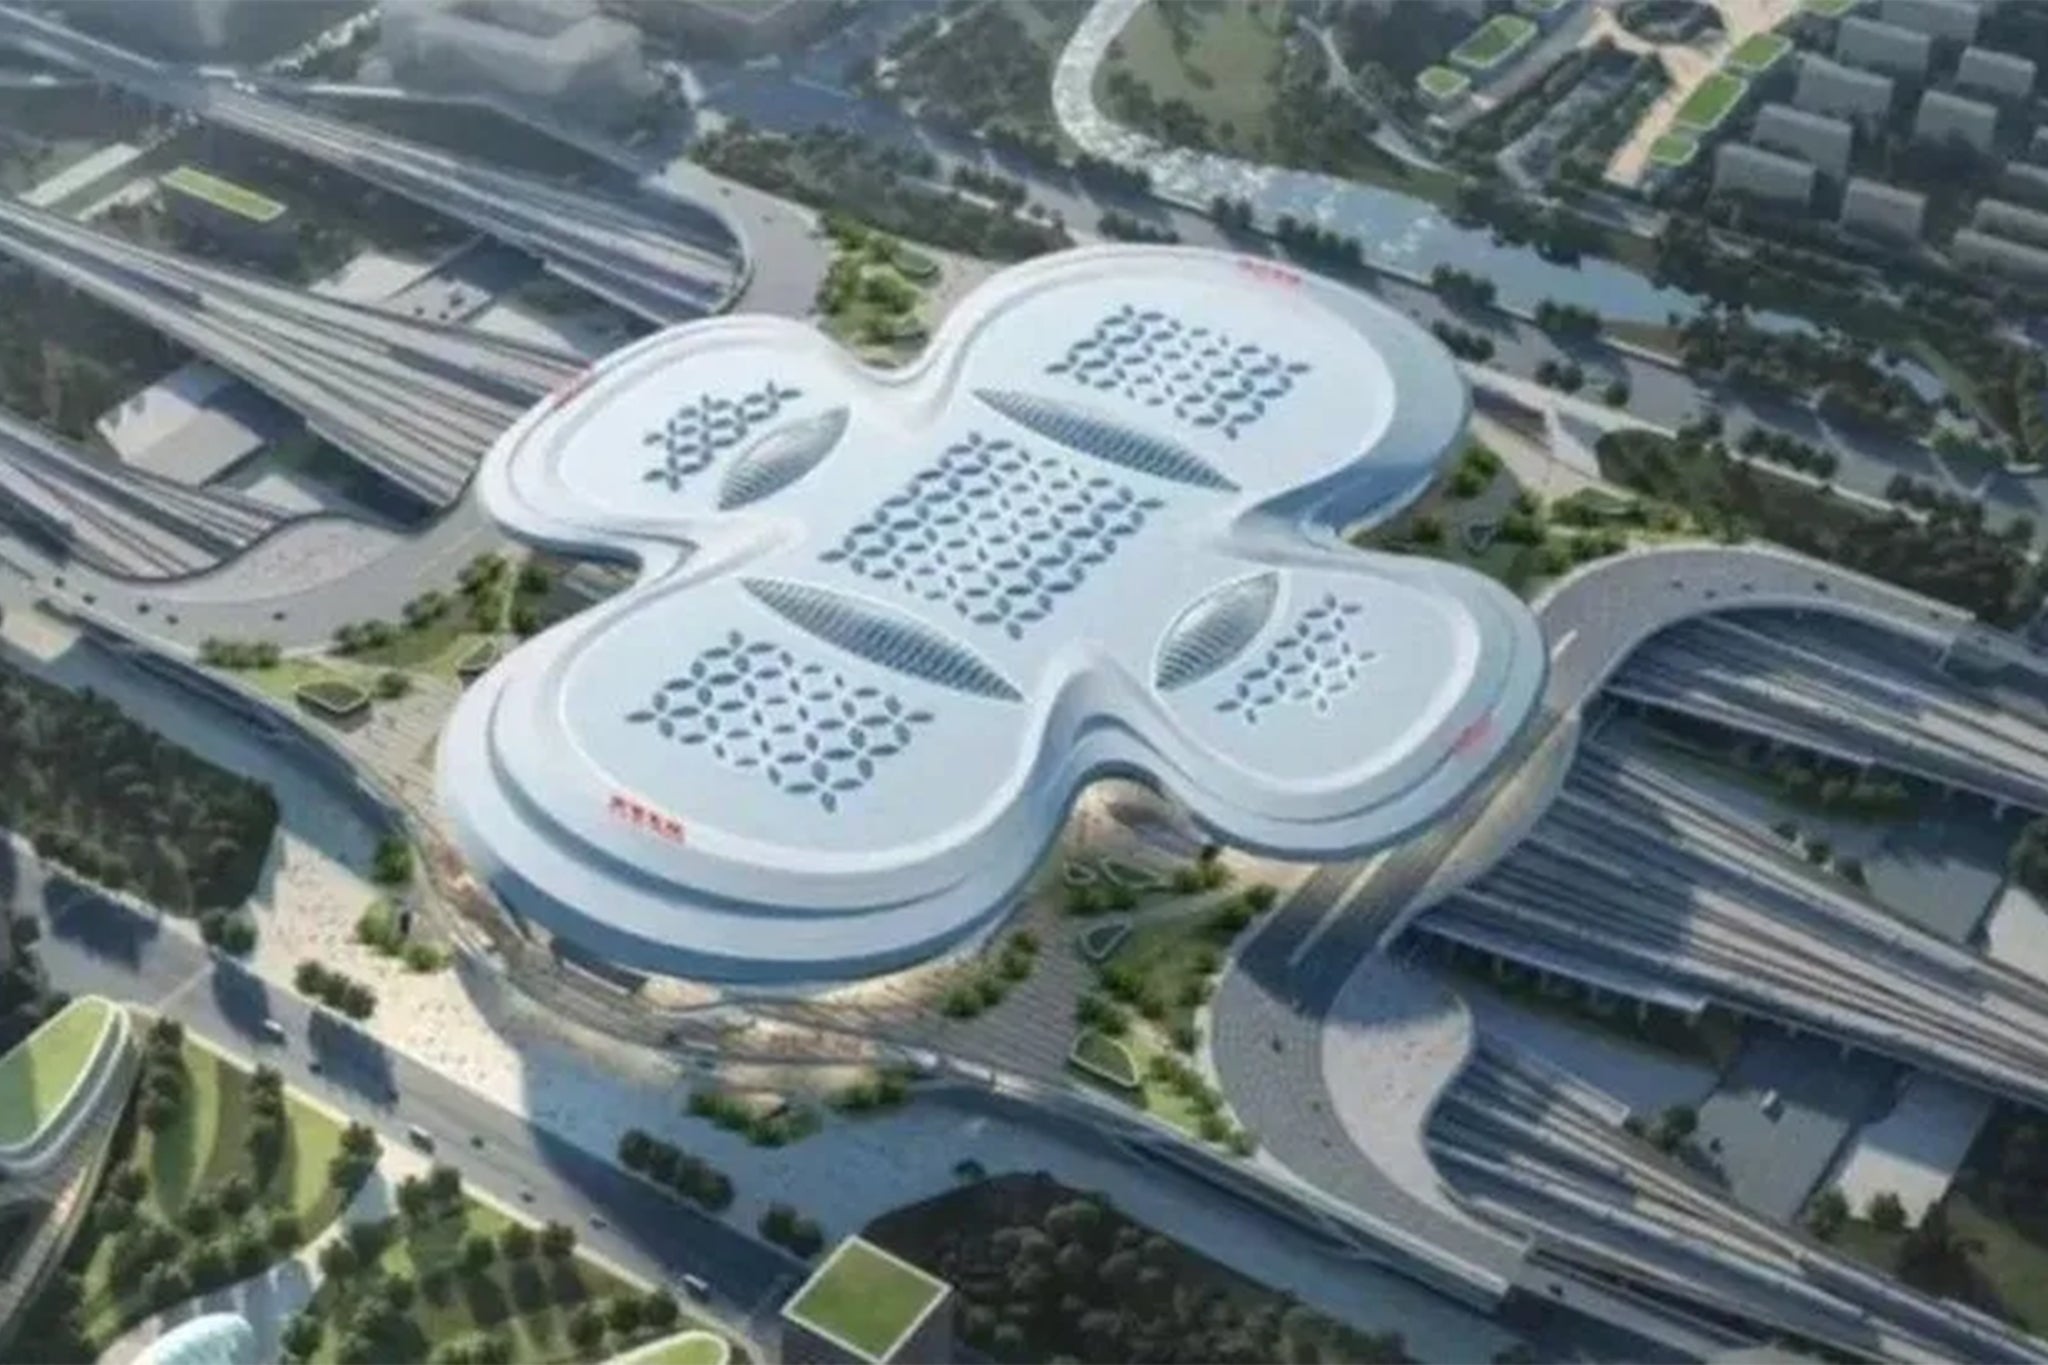 Proposed design for train station in Nanjing, China